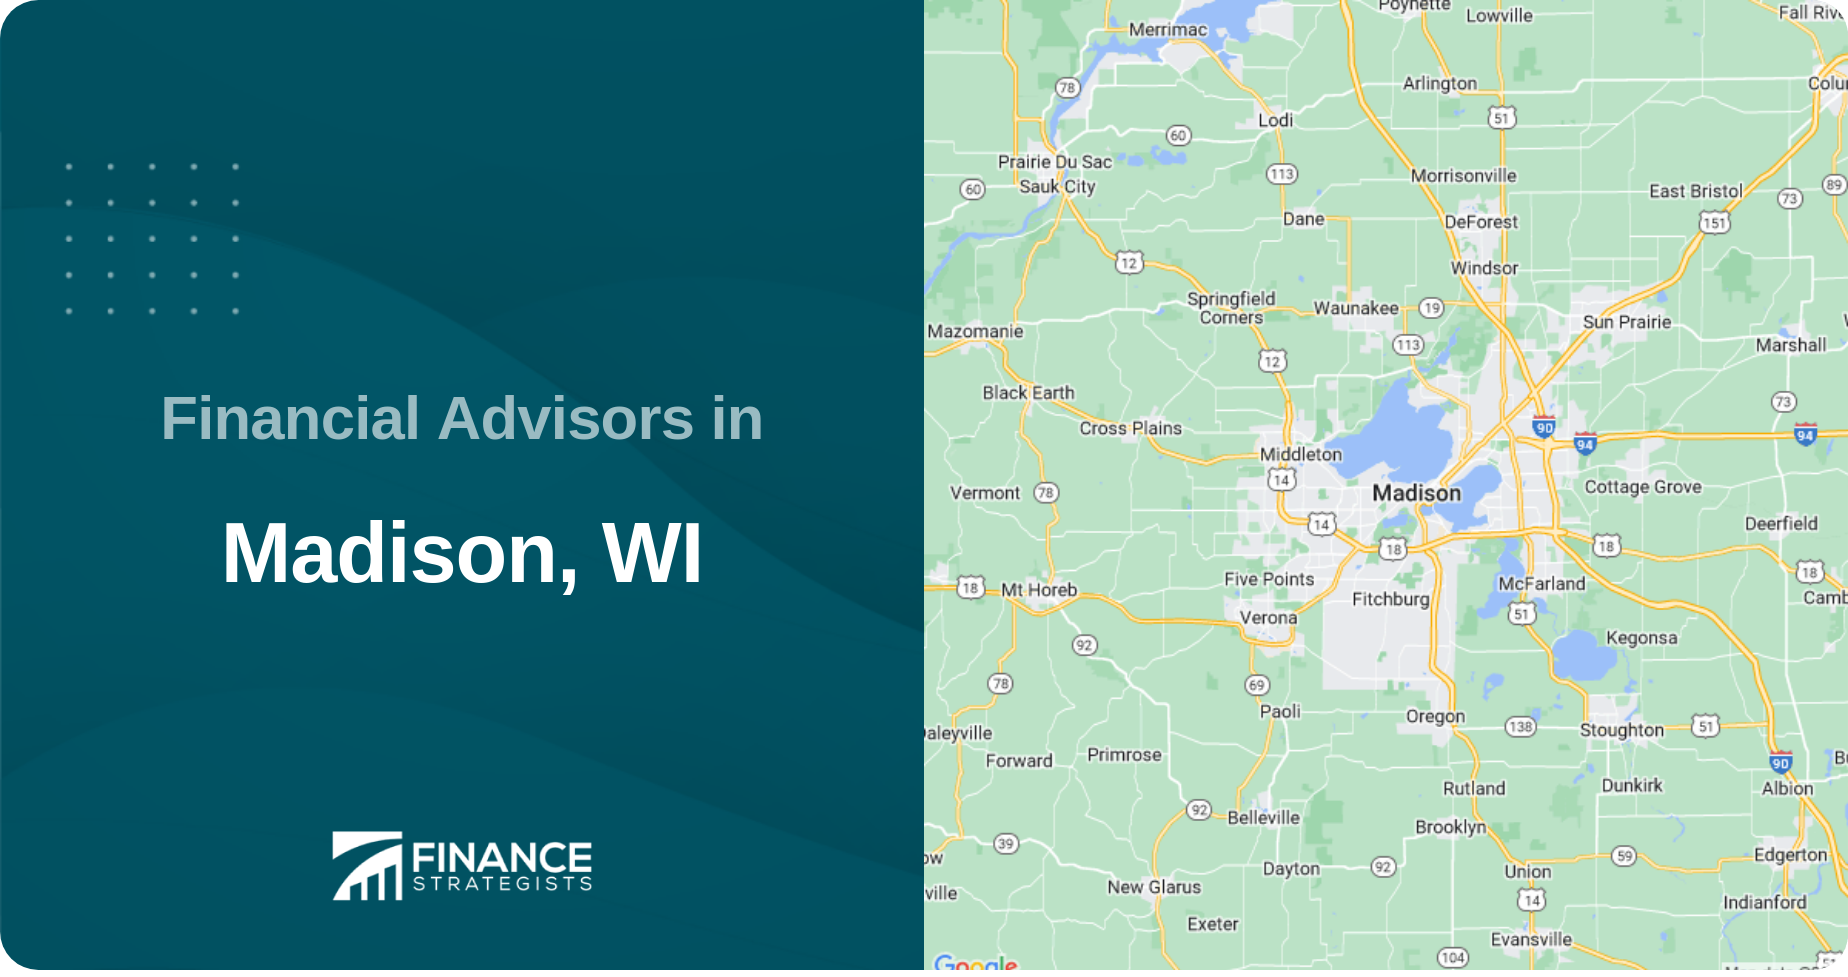 Financial Advisors in Madison, WI